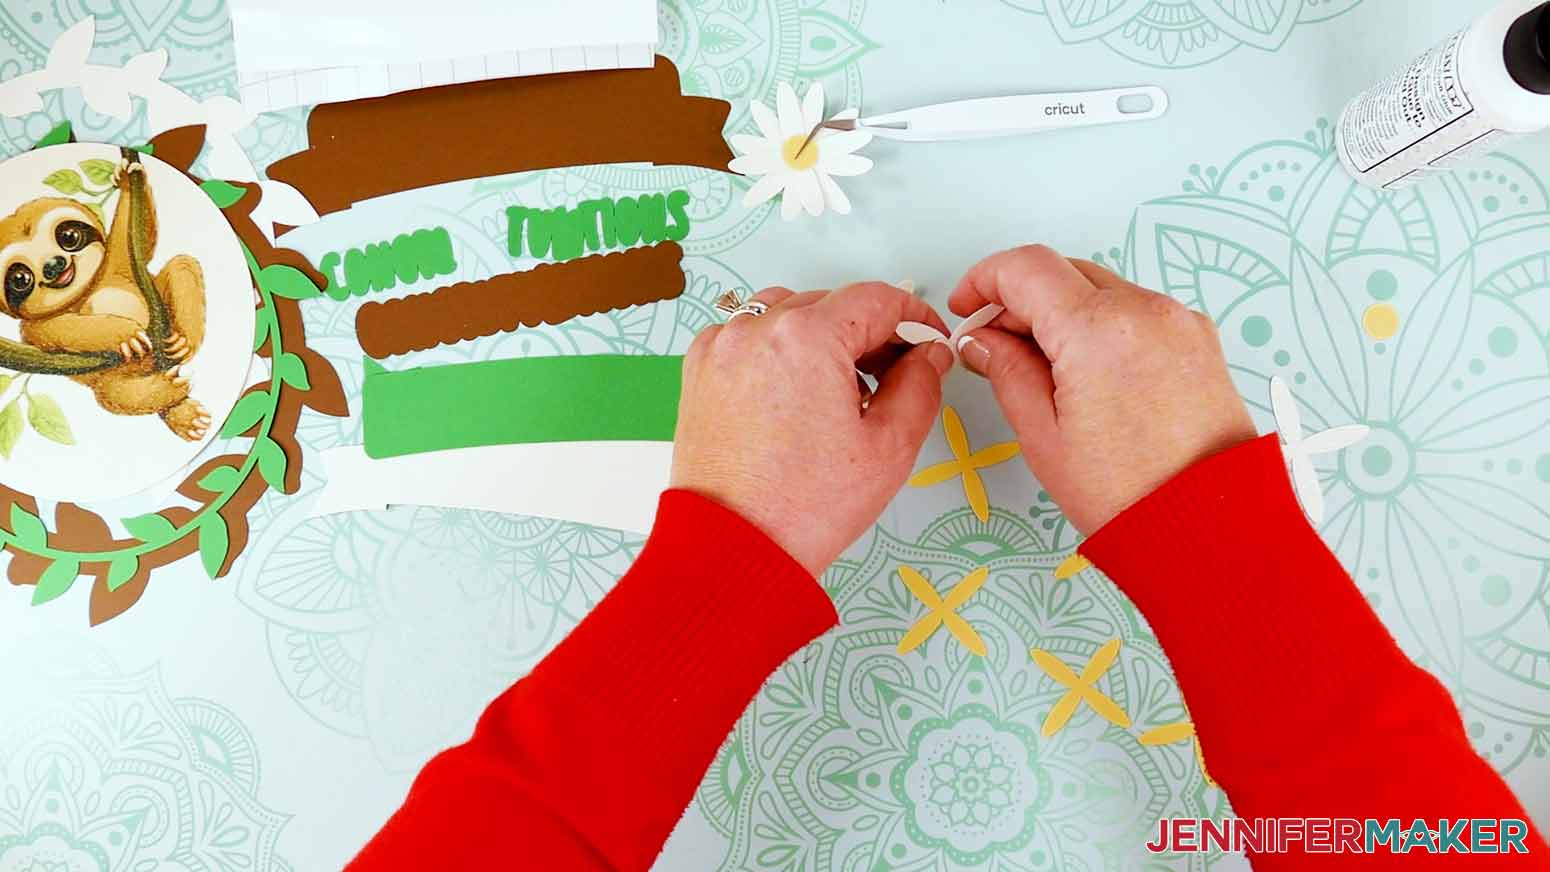 Use a fingernail along the petals from the center to the tip to shape the daisy petals.